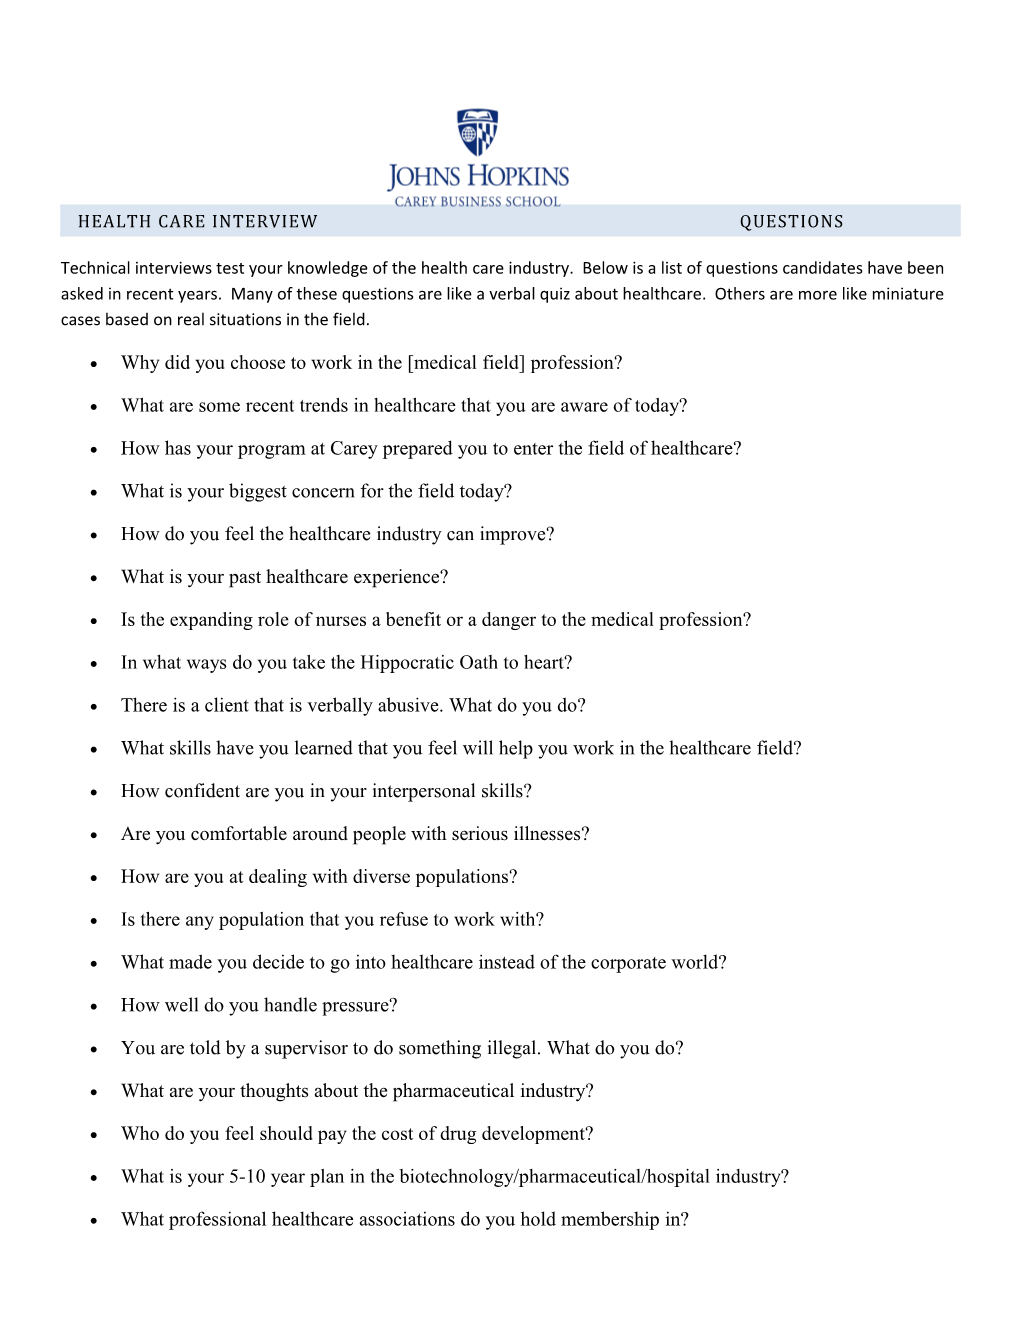 HEALTH CARE Interview Questions